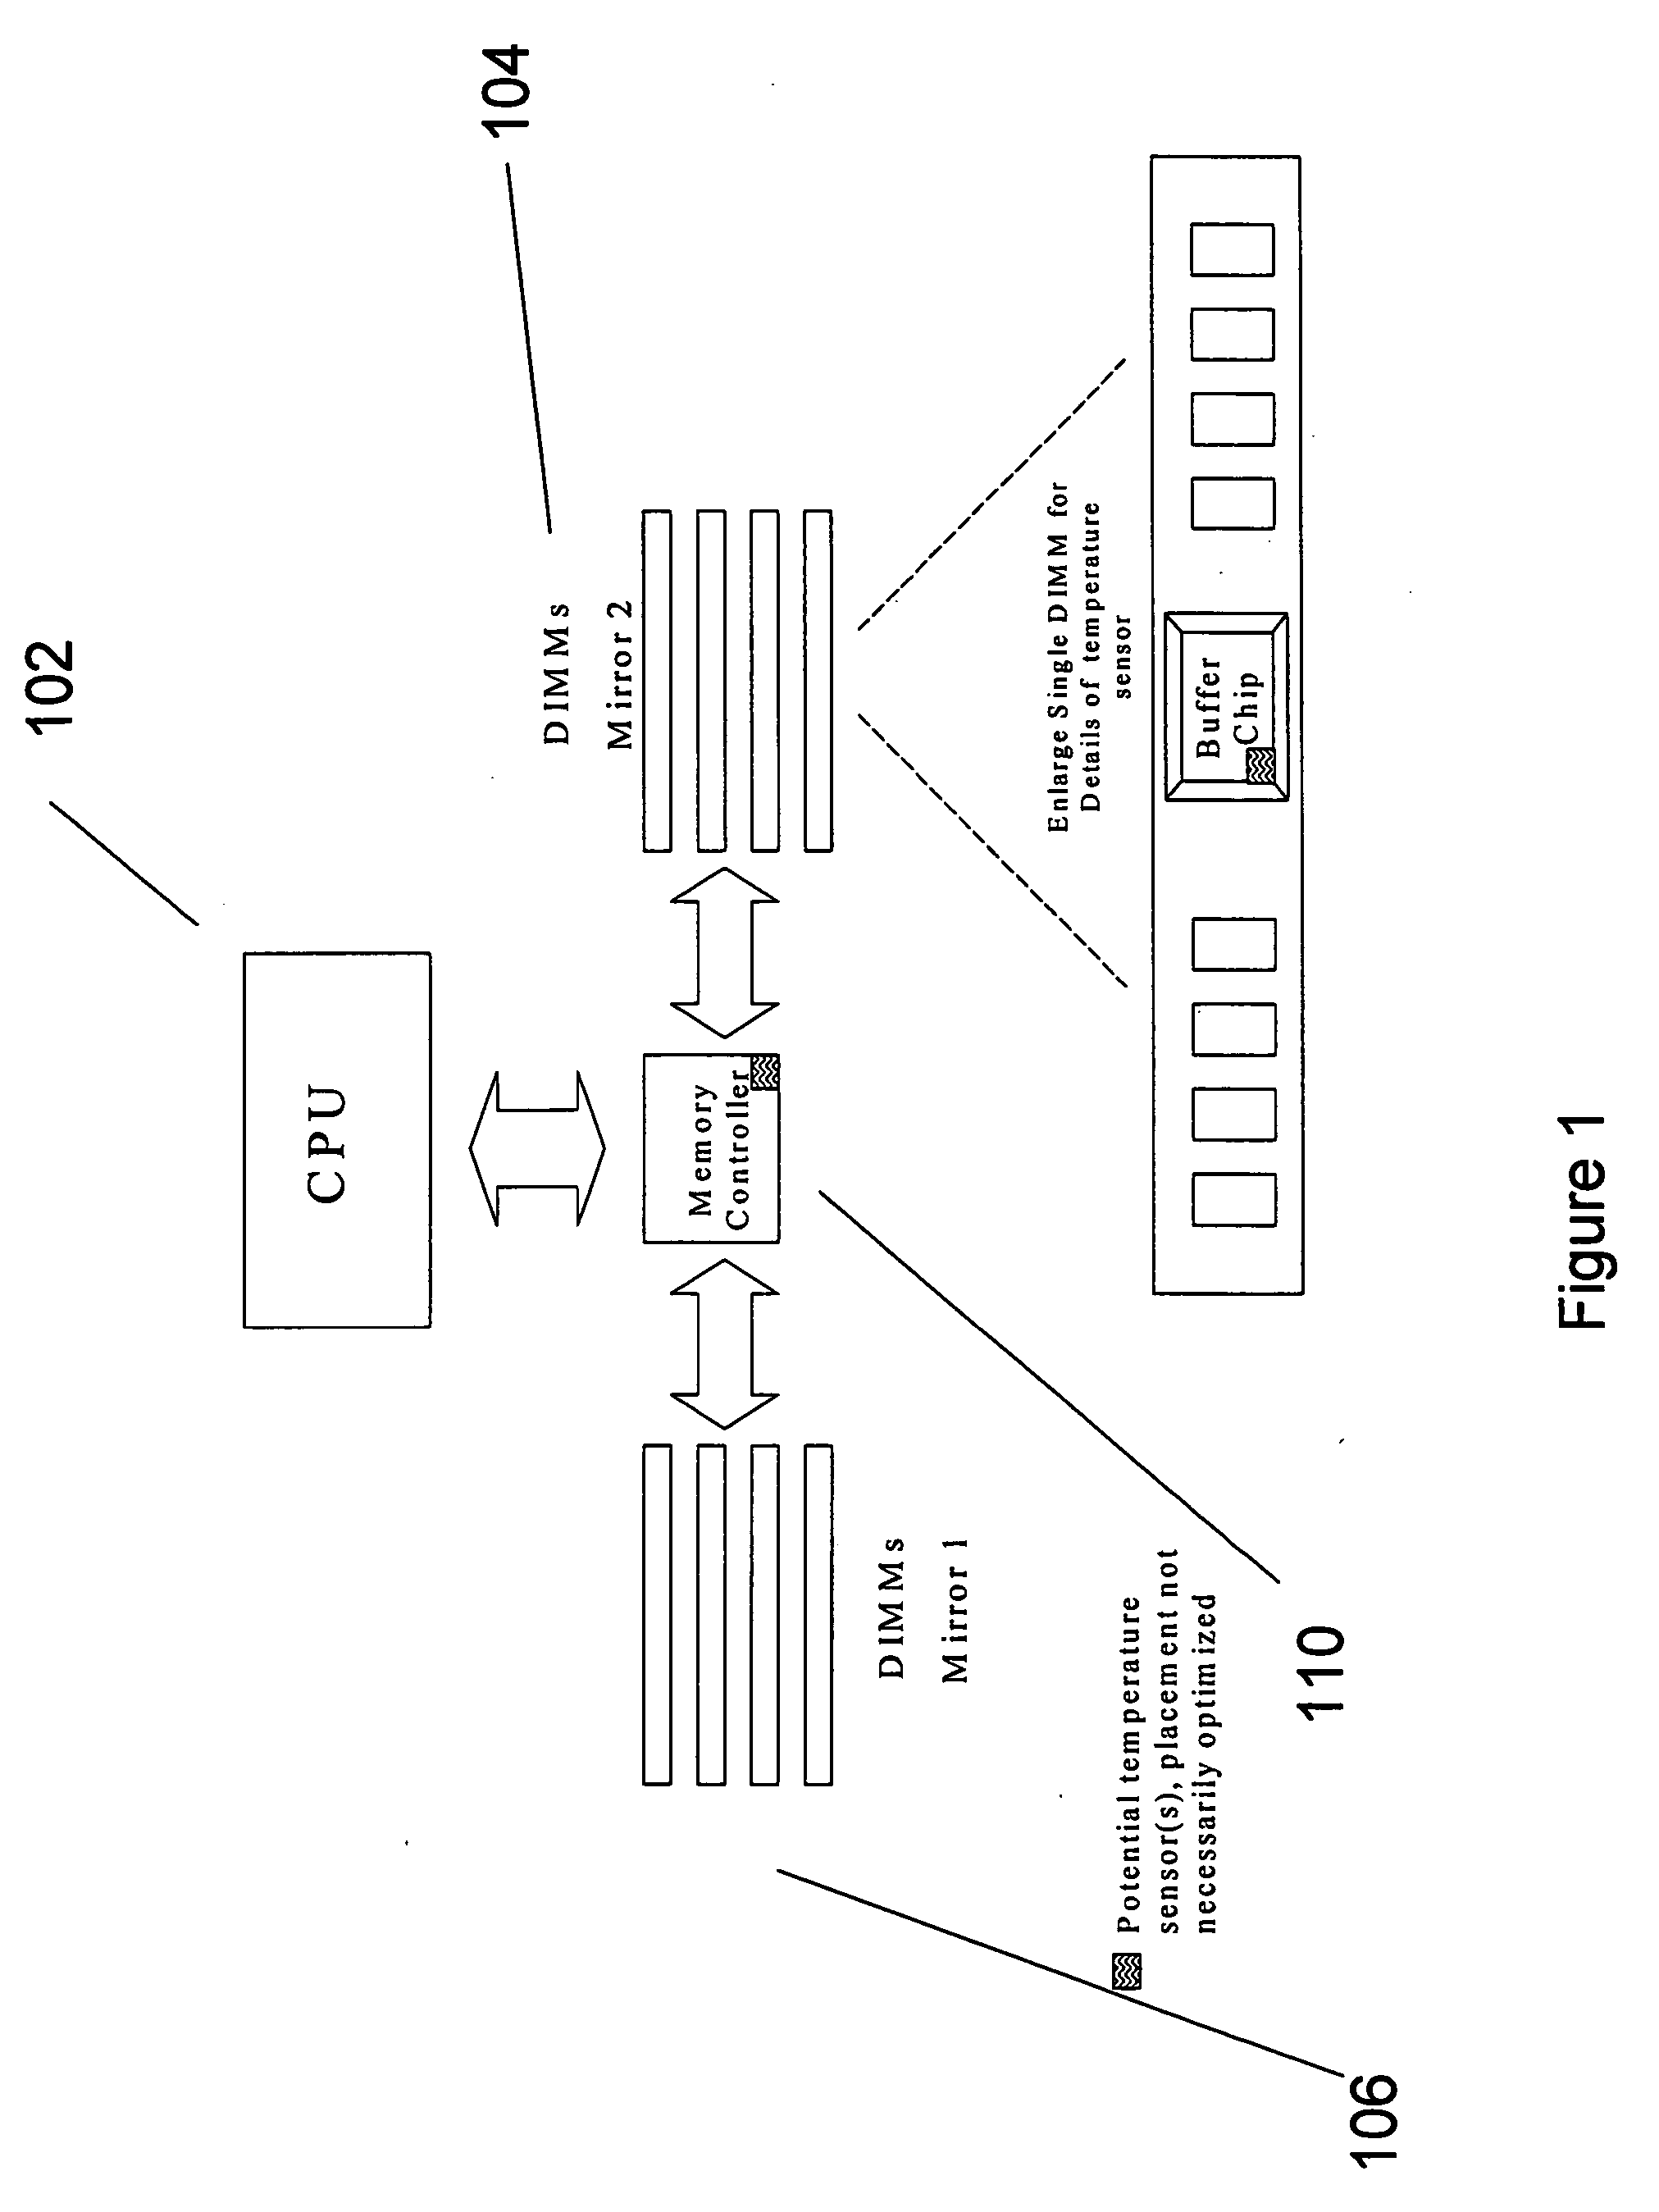 Method, apparatus, and system for memory read transaction biasing in mirrored mode to provide thermal management